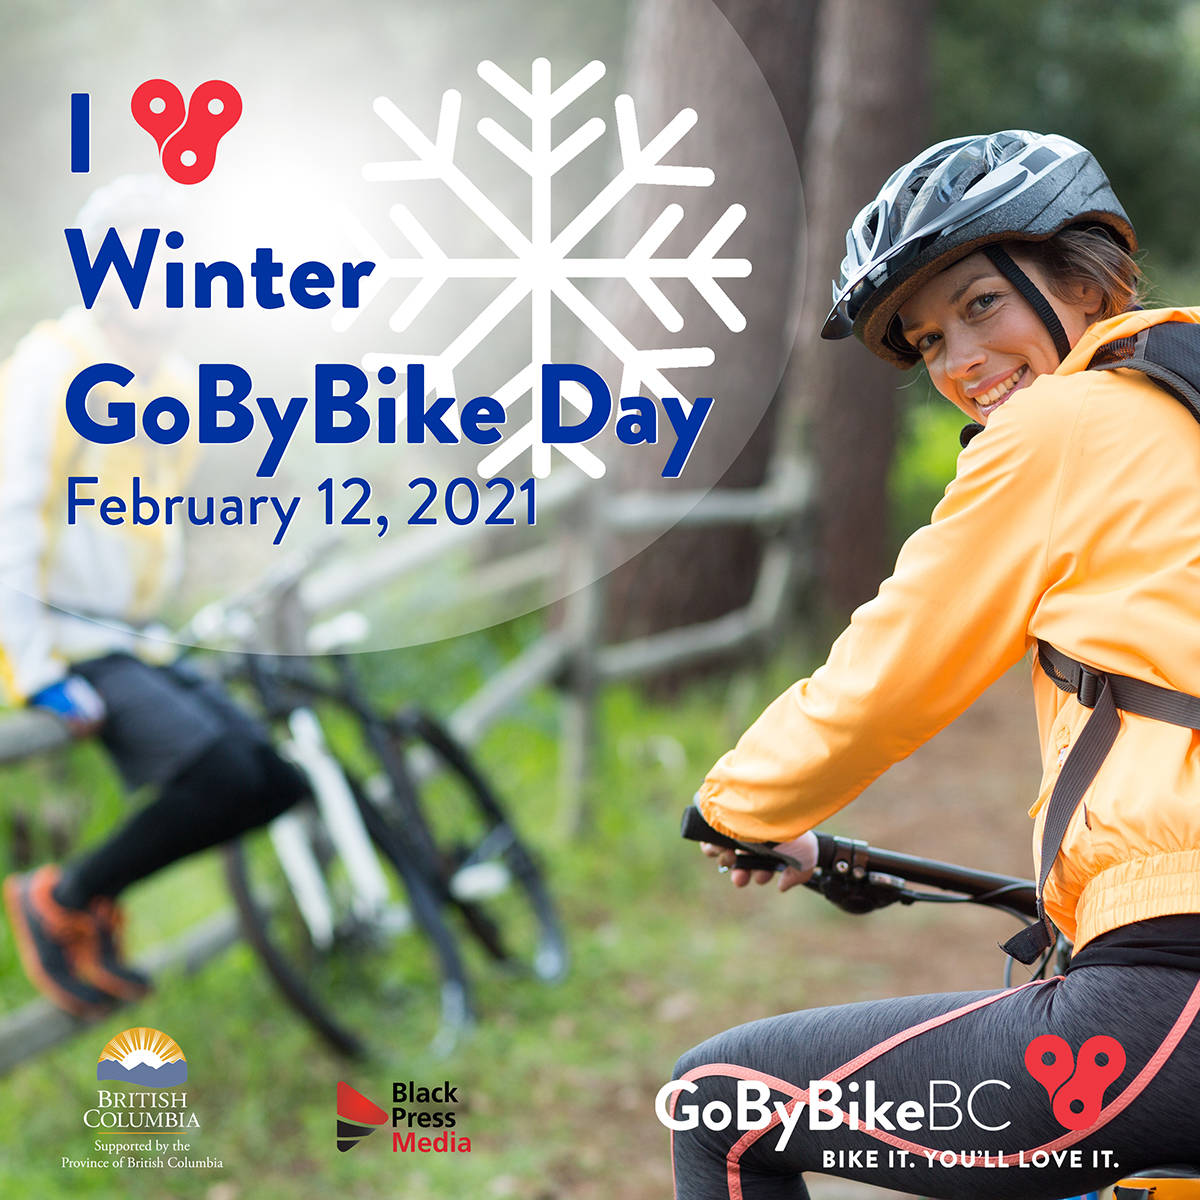 Register now for Winter GoByBike BC Day, then go for a ride on Feb. 12!